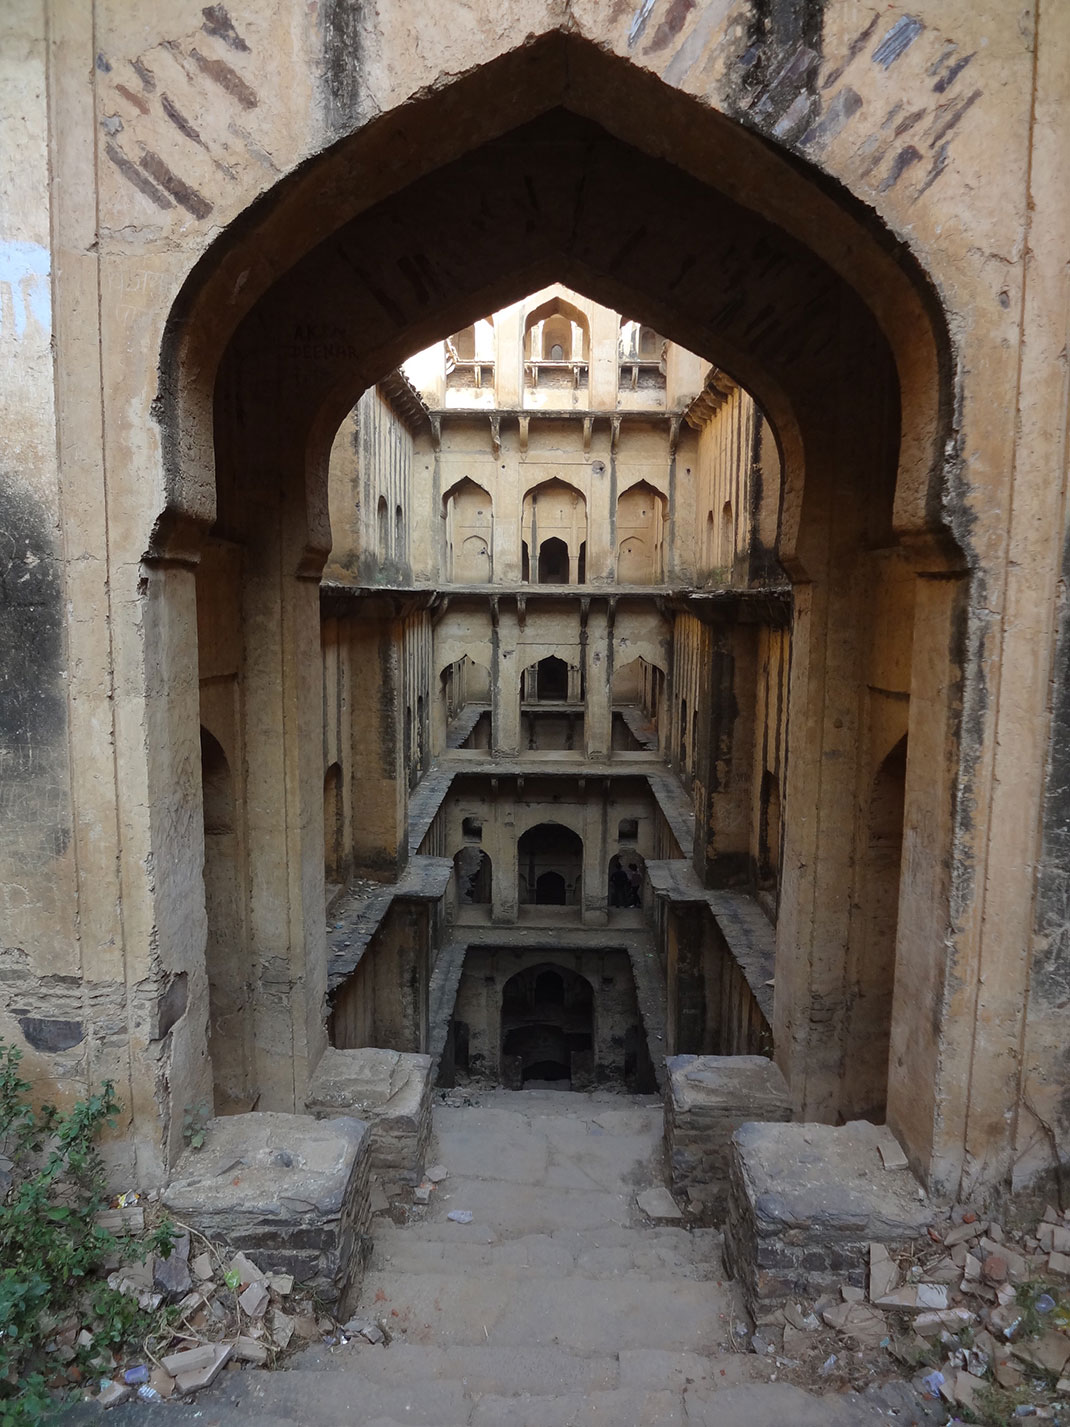 Admire These 2000 Year Old Somptous Buildings In India Destined To Disappear-16